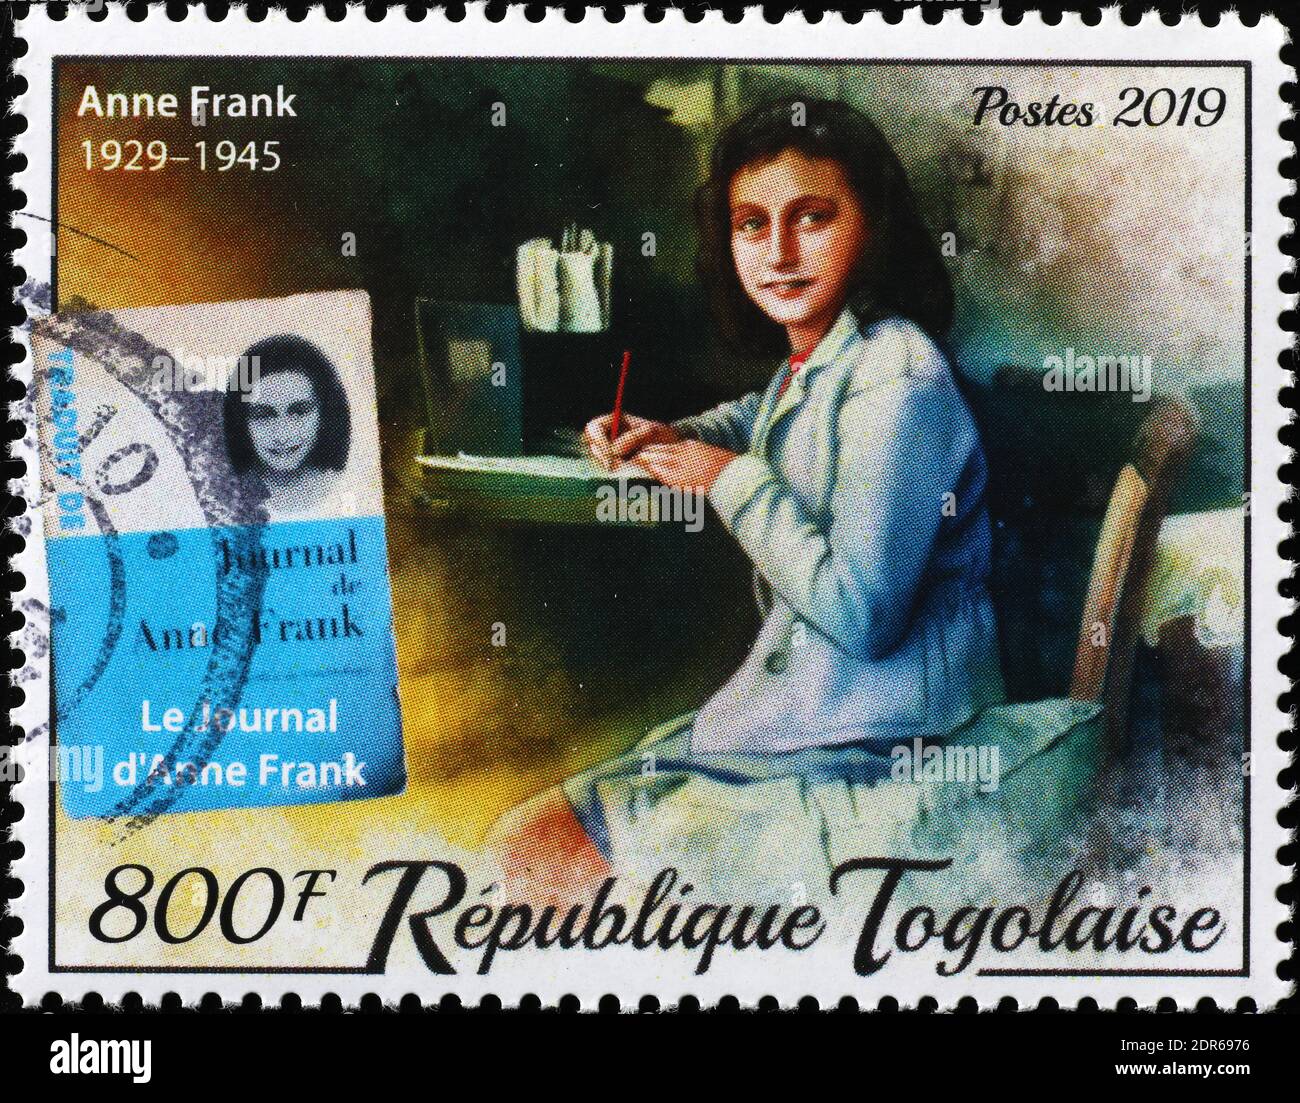 Anne Frank portrait on stamp of Togo Stock Photo